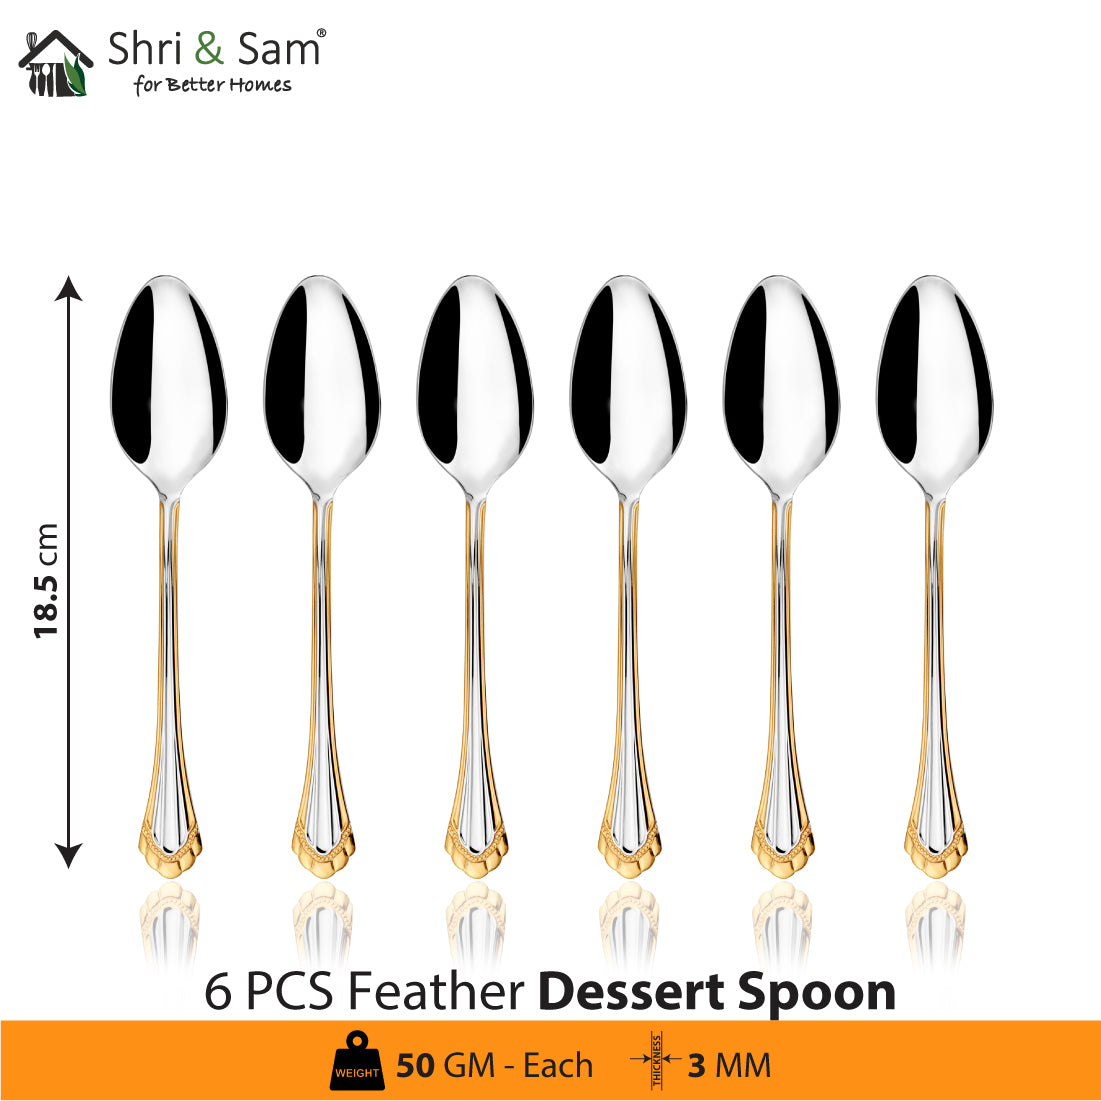 Stainless Steel 24 PCS Cutlery Set with Dessert Soup Spoon Feather